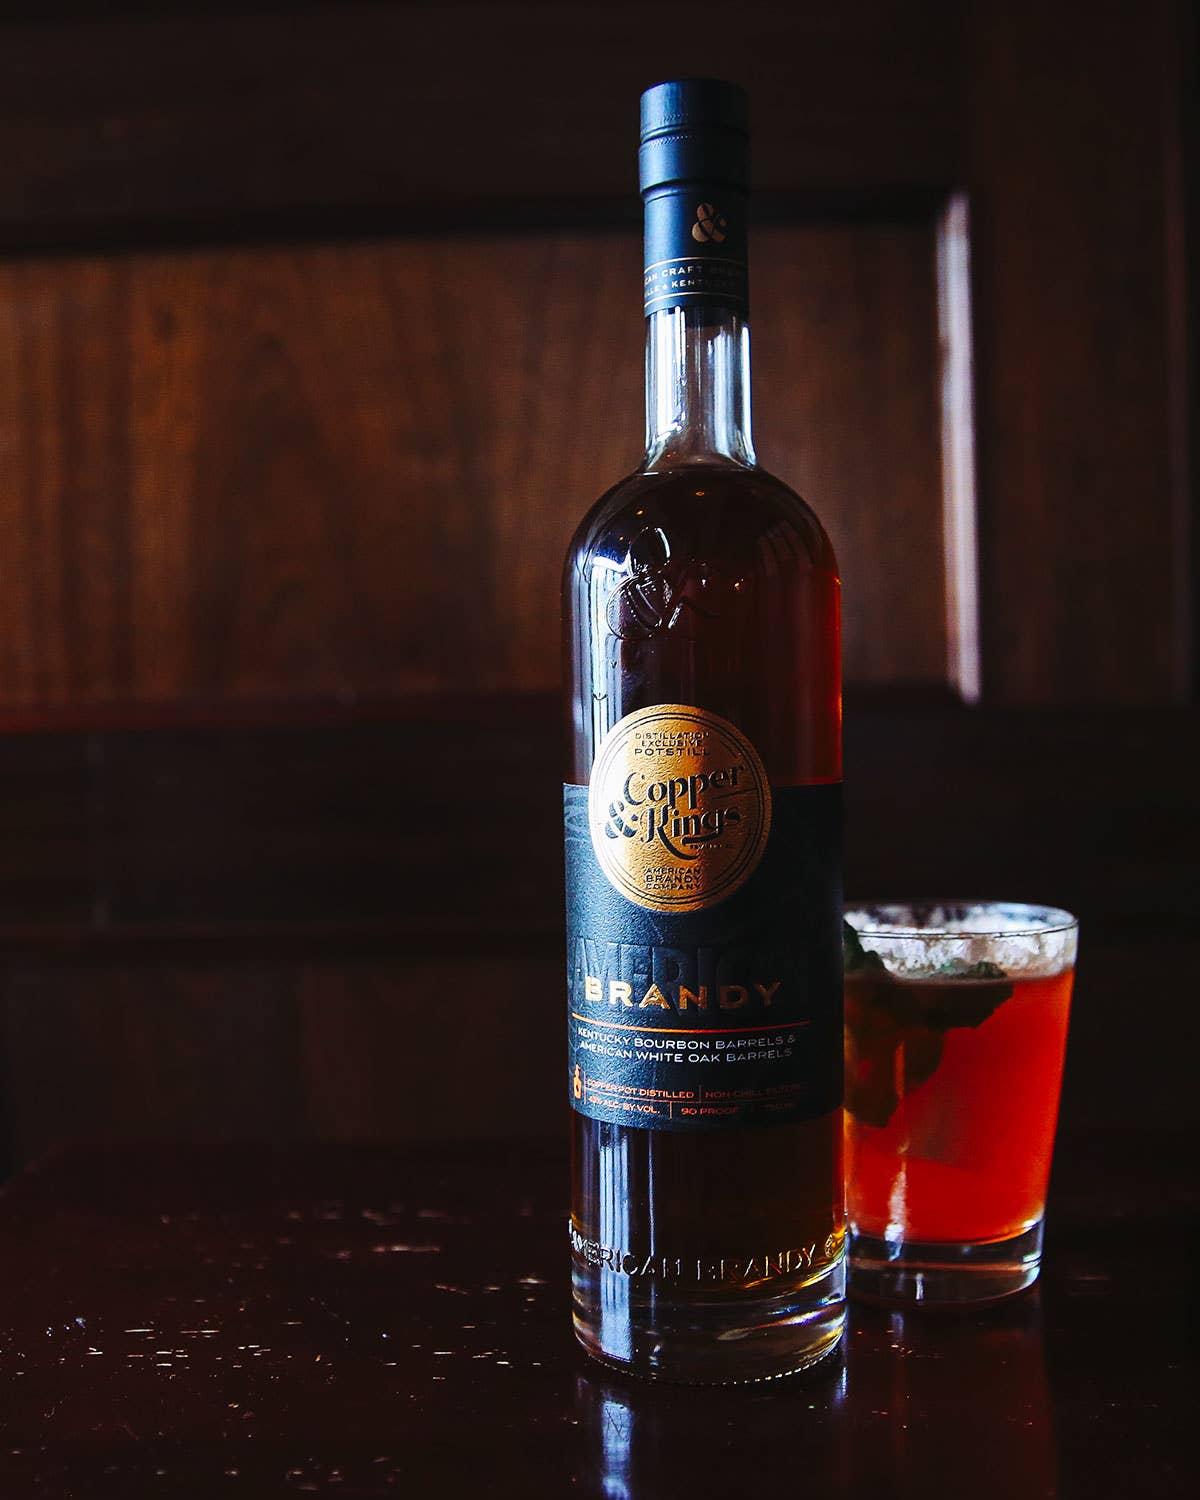 This Brandy is One of the Best Spirits From Bourbon Country